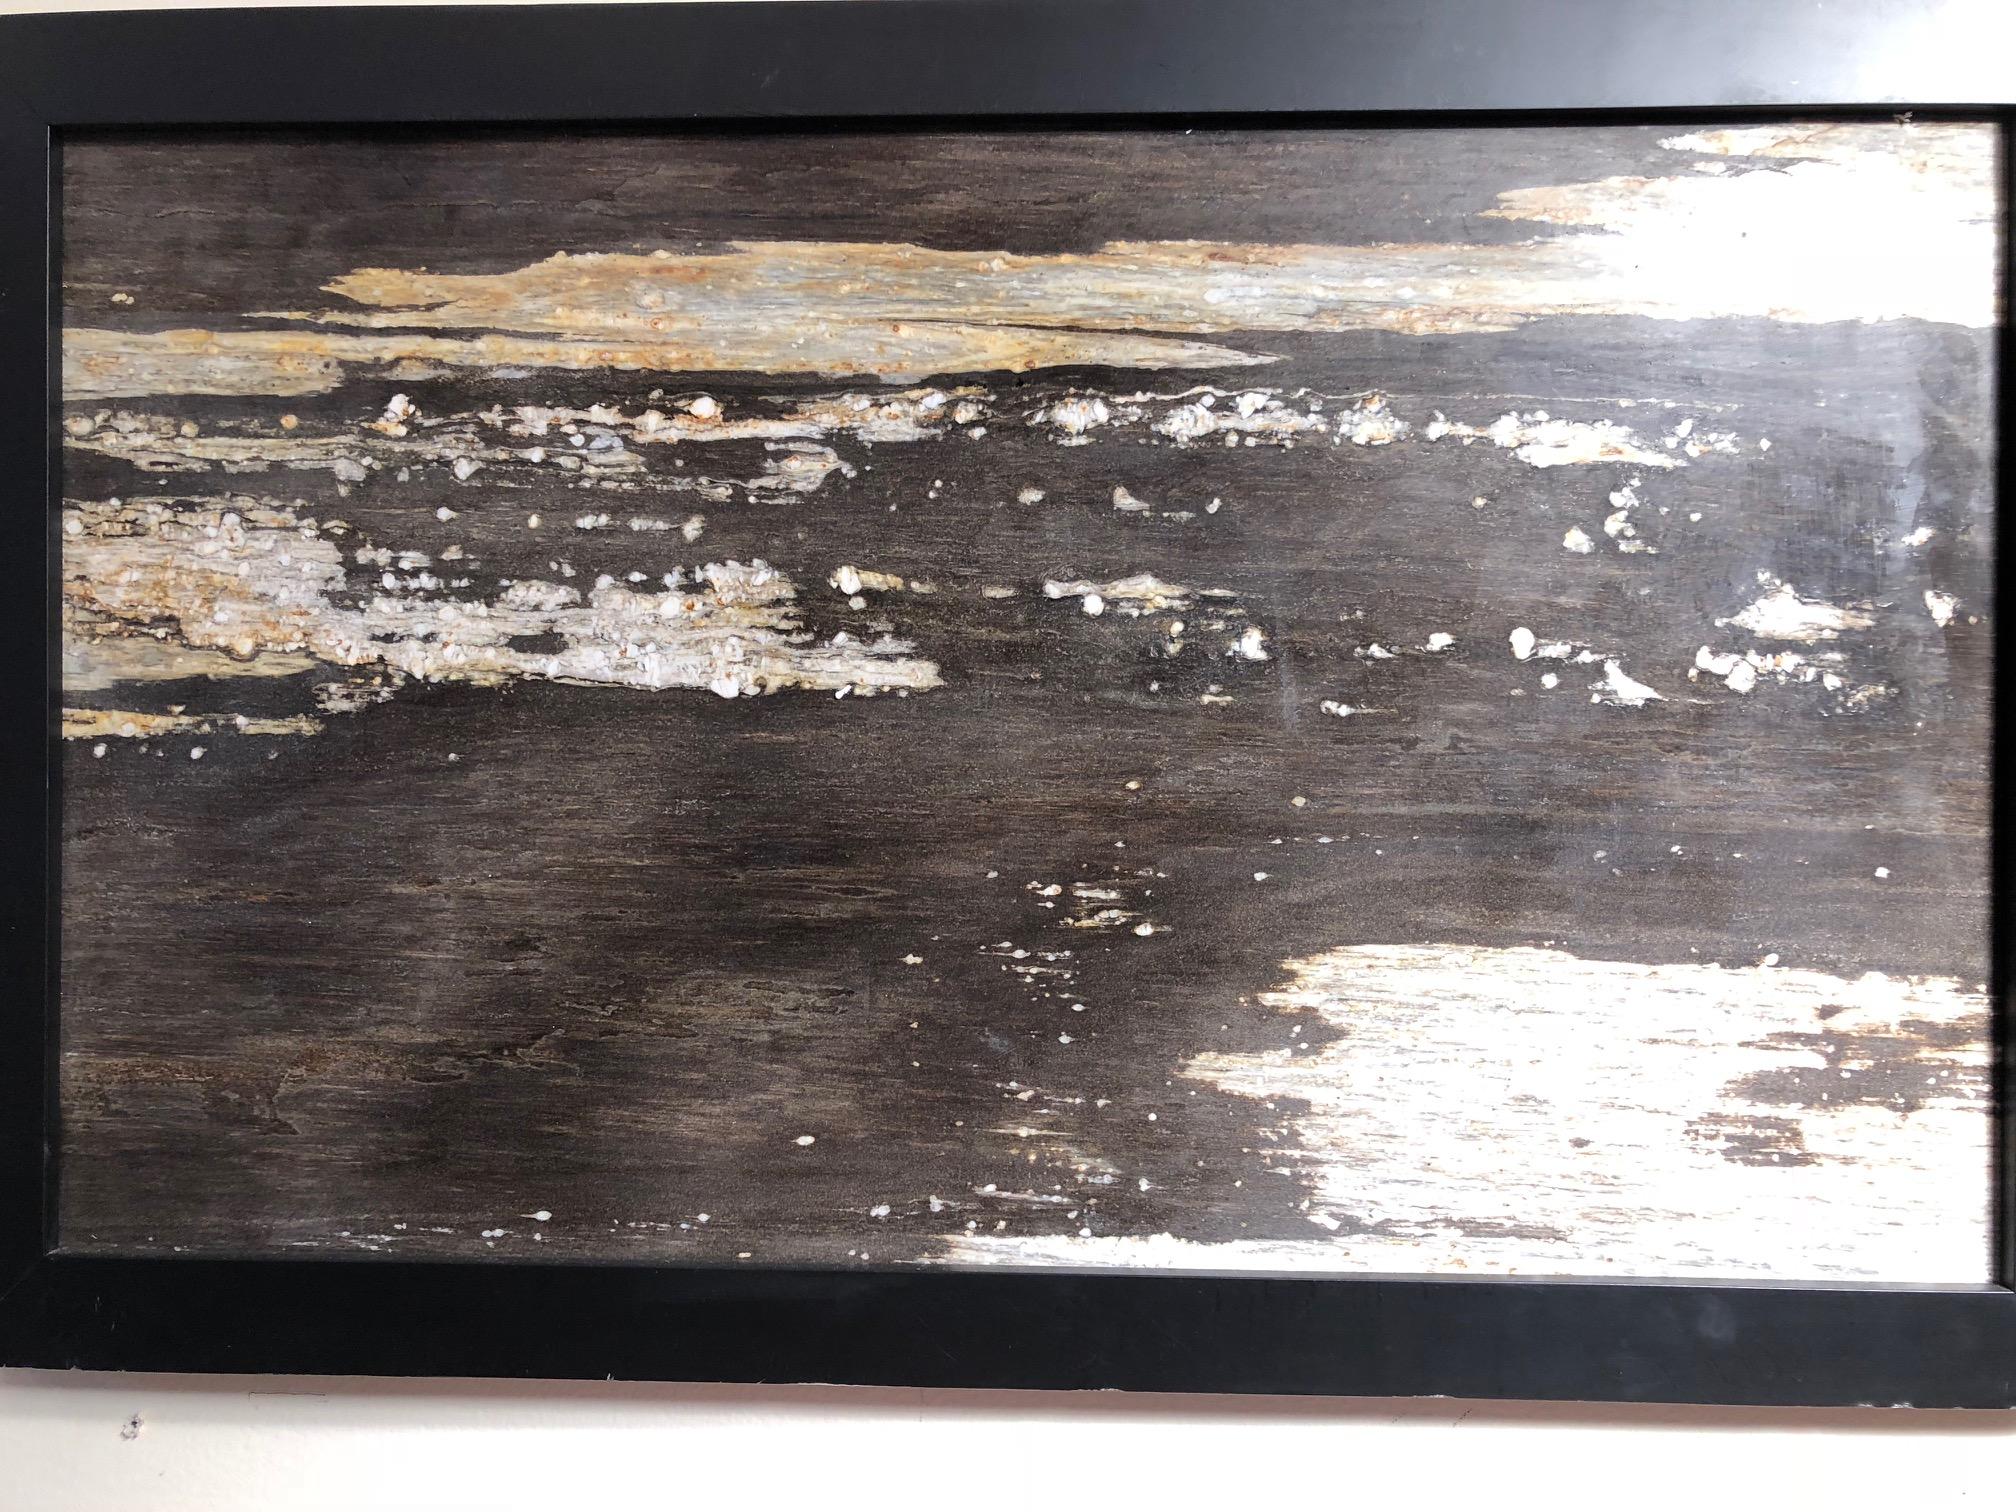 Extraordinary Natural work, one of a kind. Custom framed.

This Chinese extraordinary natural stone painting of a moon light reflection on water could remind us of a similar and unique evening sea coast experience in our lives. The powerful and